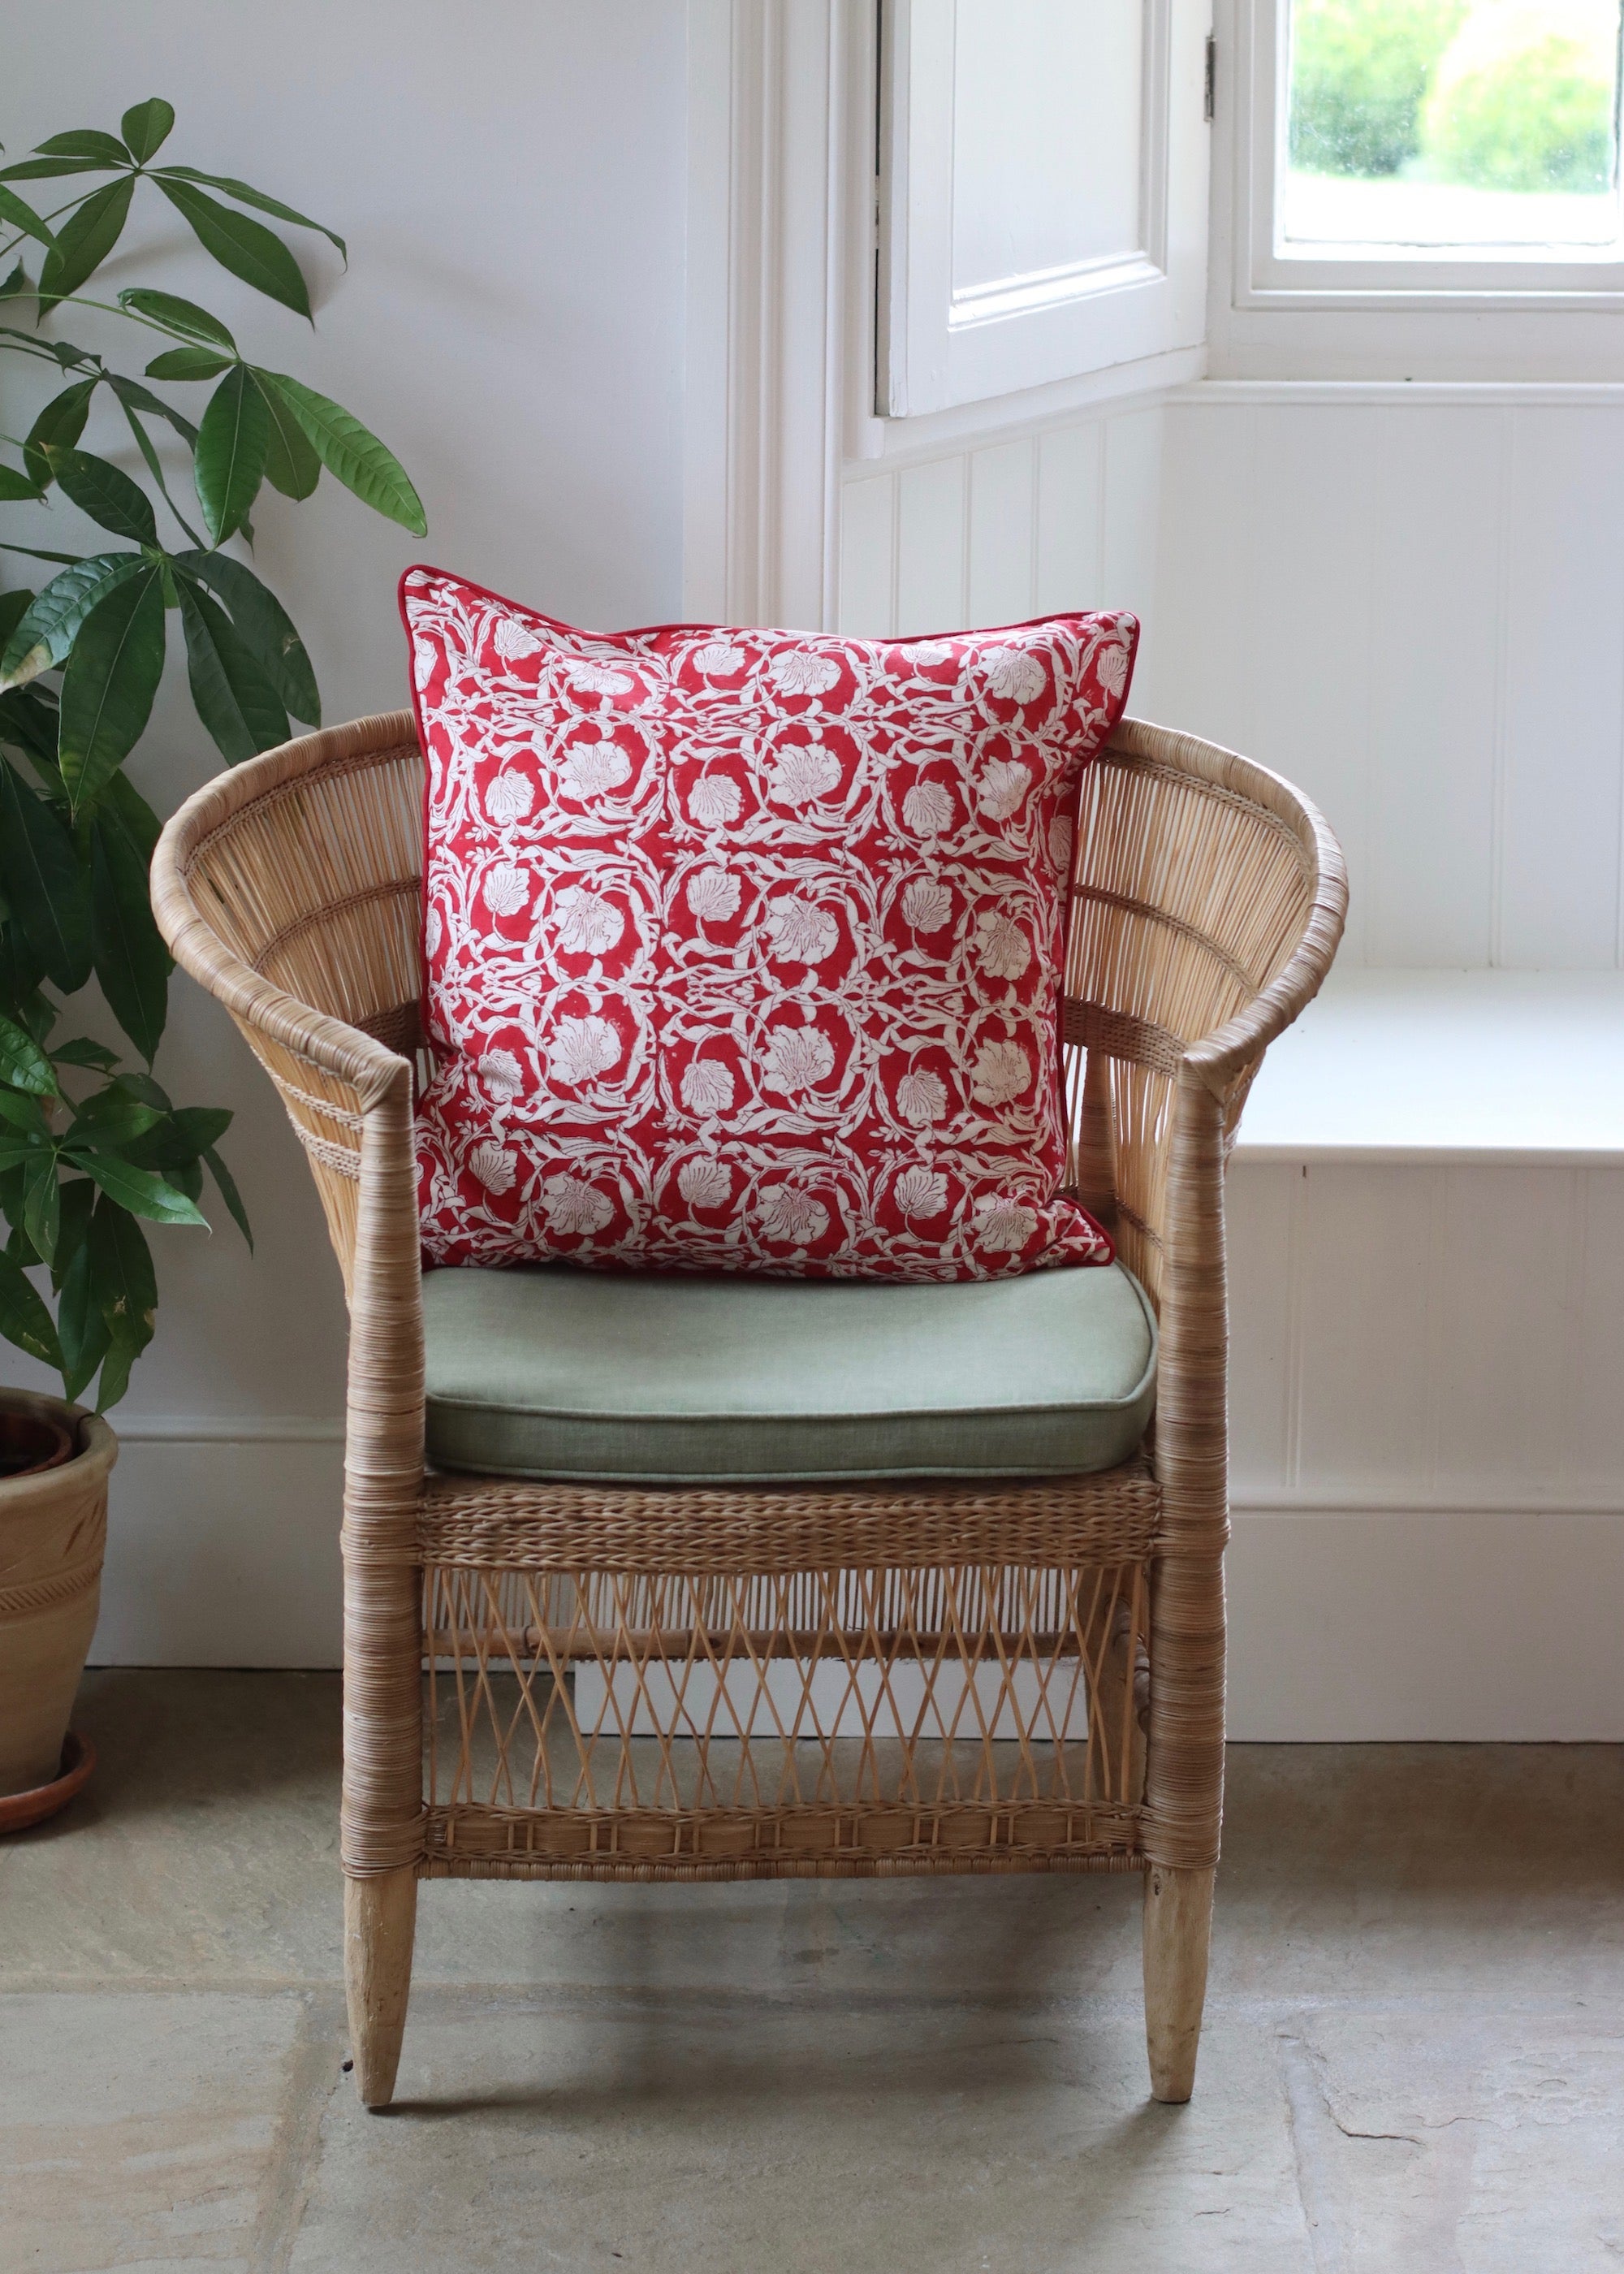 Block Print Cushion Cover - Red Flowers